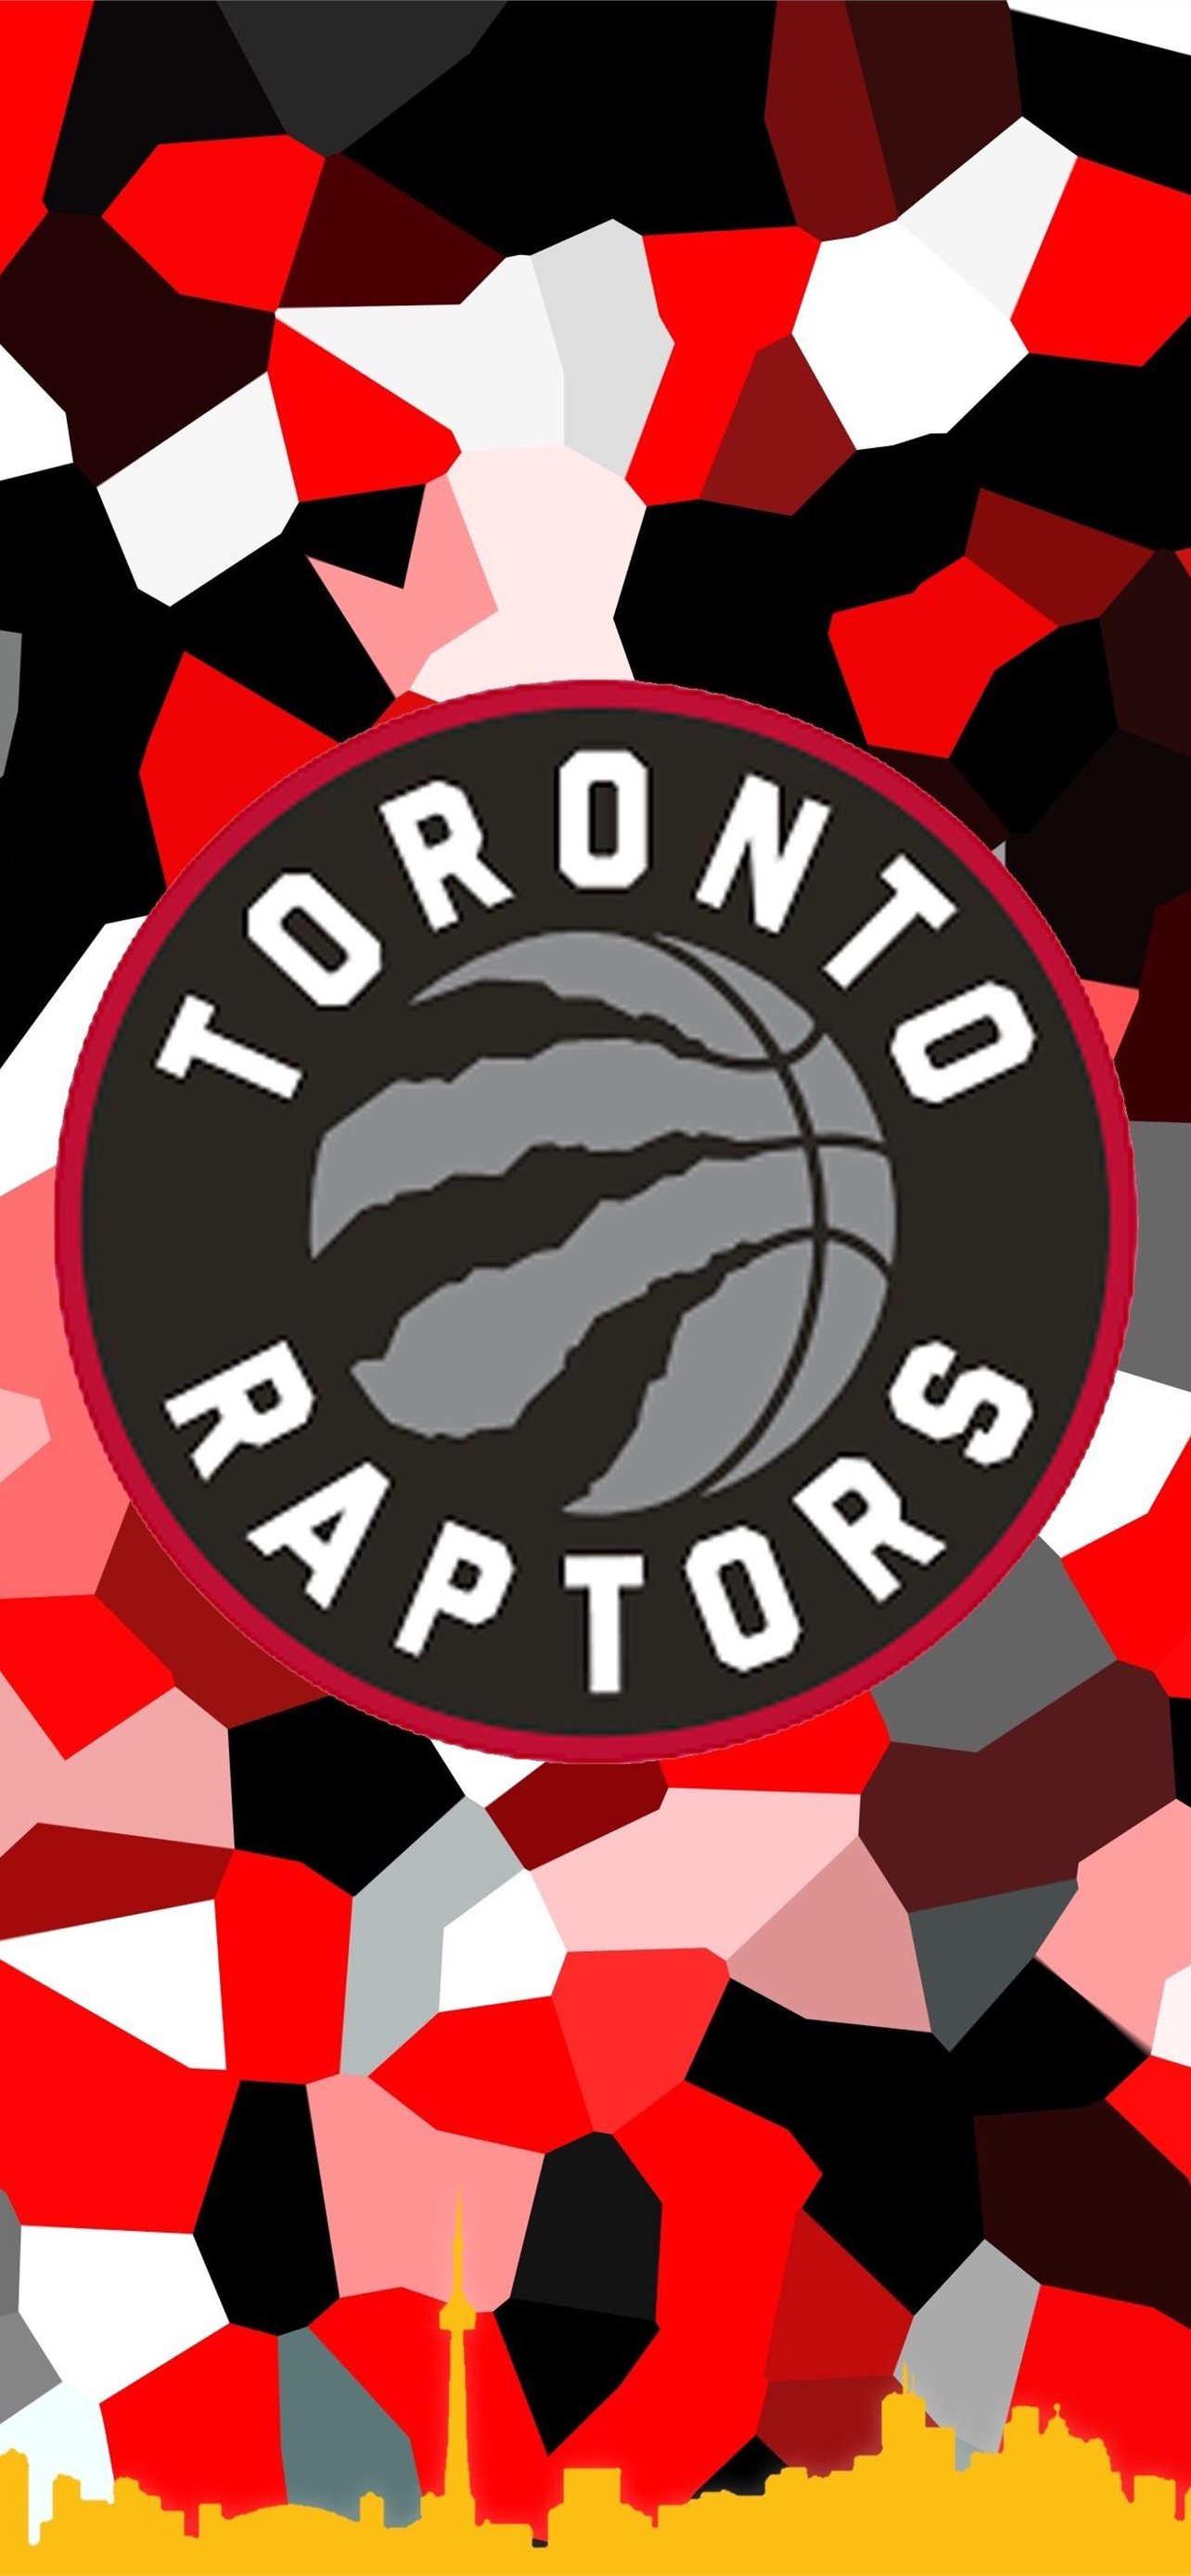 Created Some Toronto Raptors Phone Wallpapers Added iPhone and Desktop